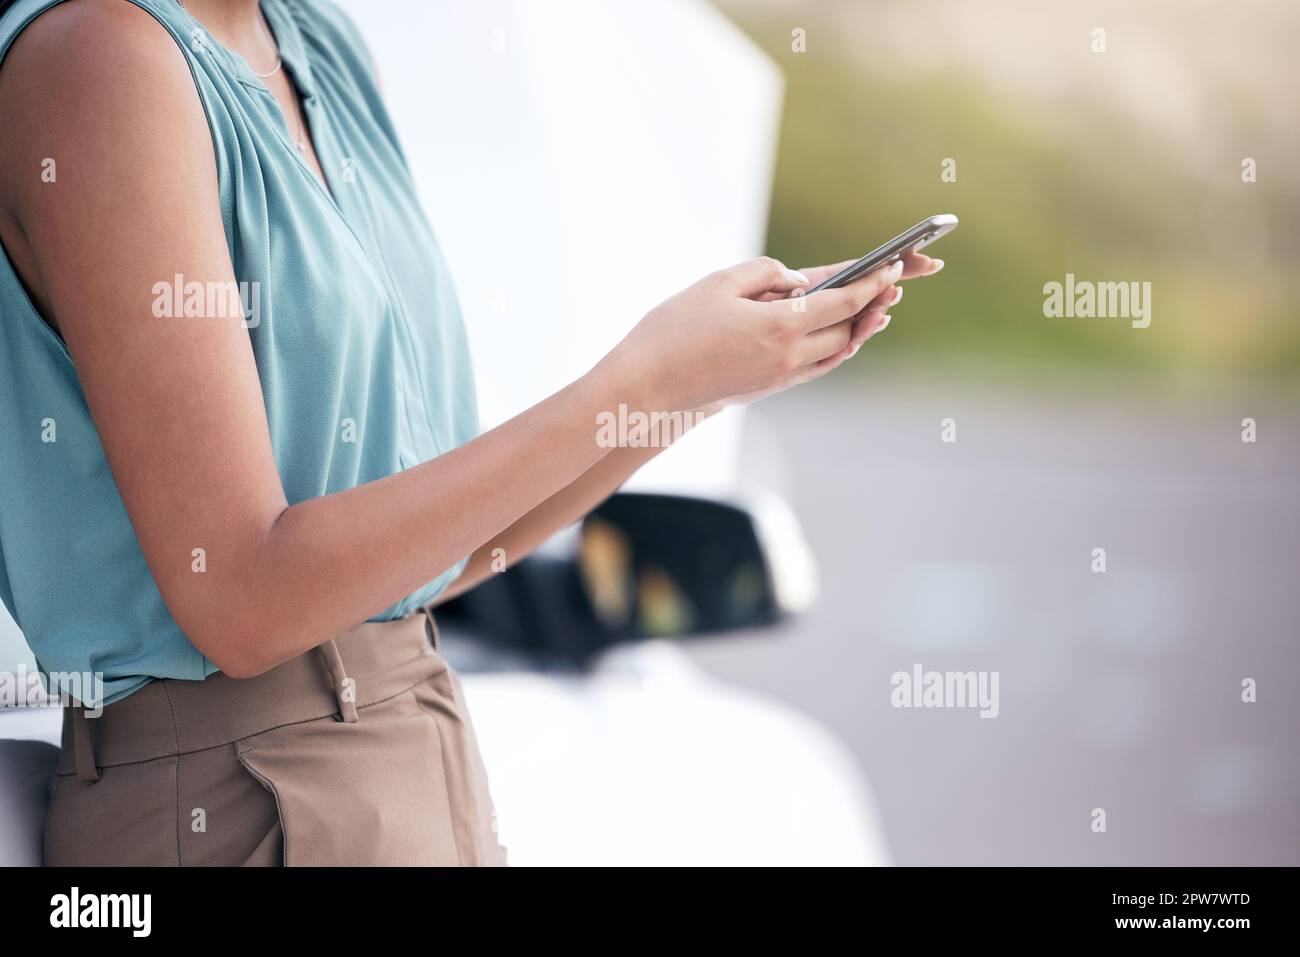 Closeup woman calling roadside assistance. Hands of a young woman dialling for help after a vehicle breakdown. Having car trouble and in need of a mec Stock Photo